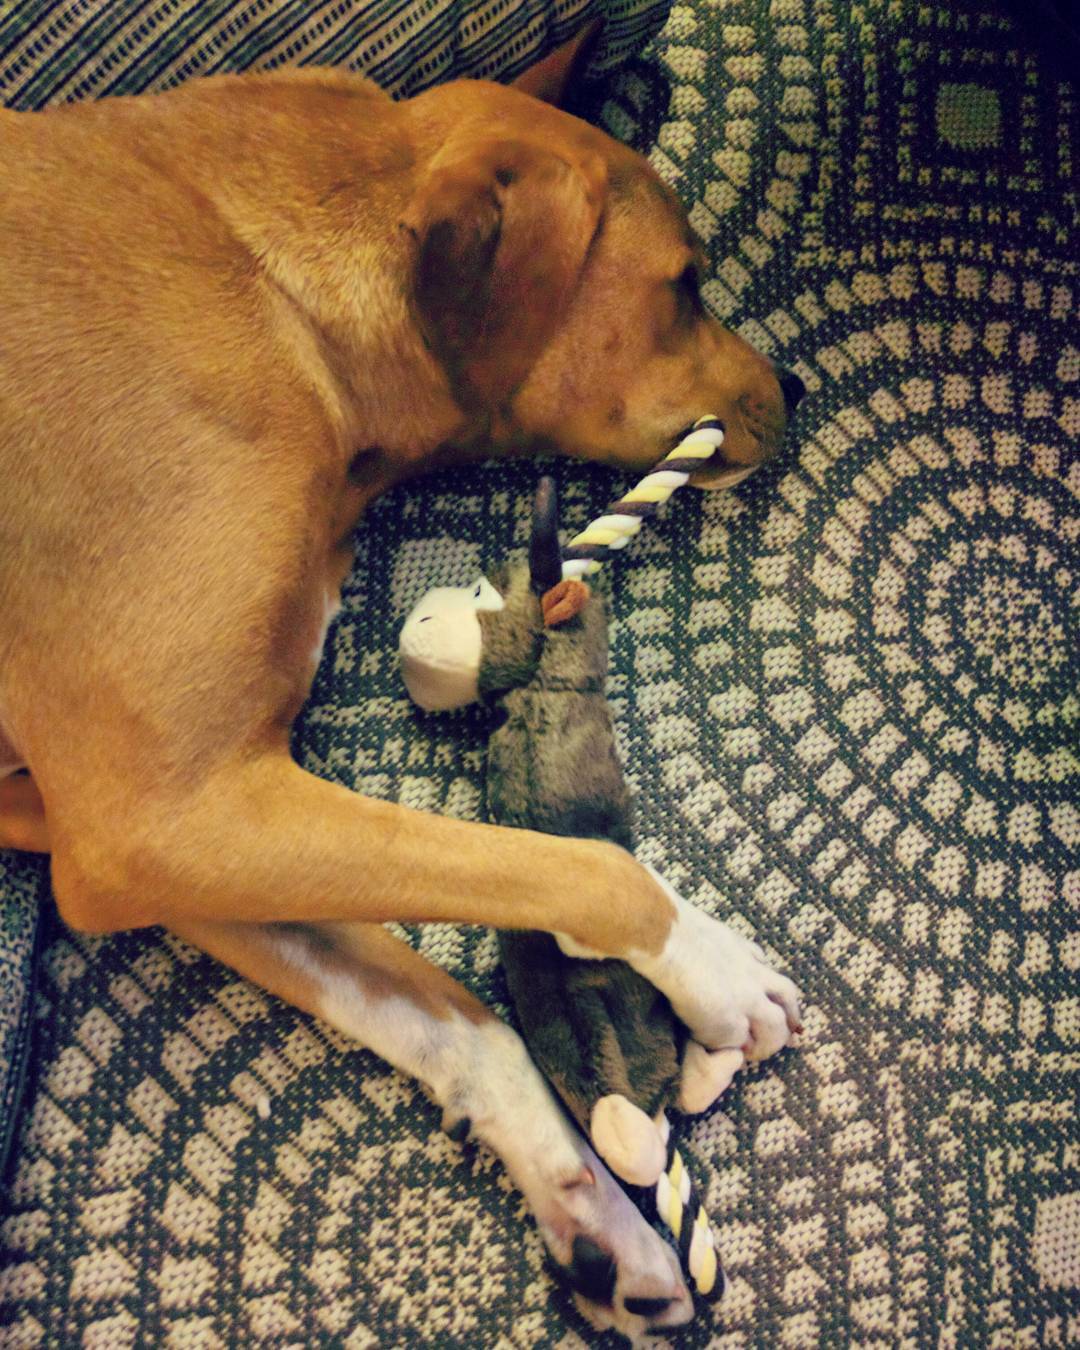 “Don’t you dare try to steal my monkey while I’m sleeping!” 